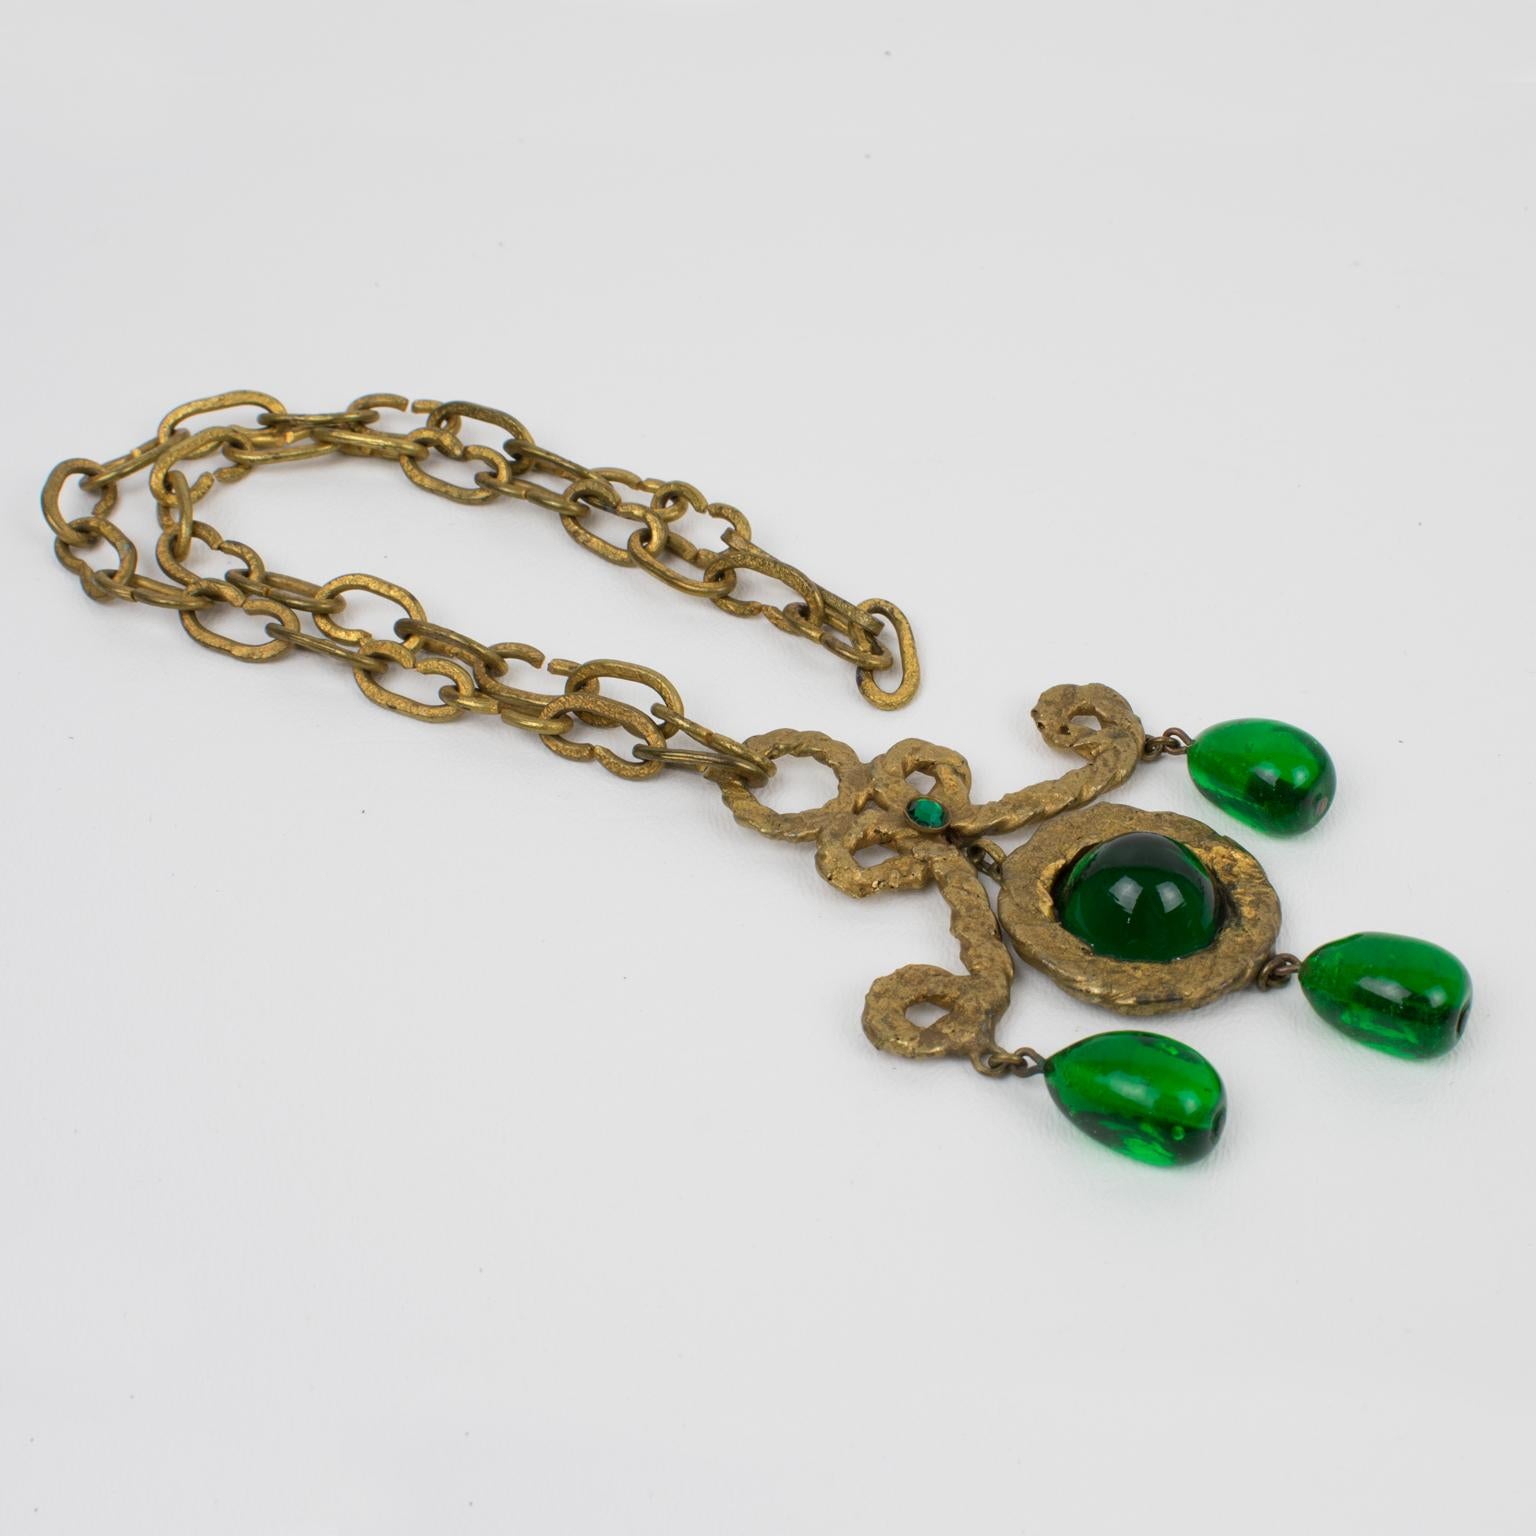 Henry Perichon Gilded Bronze Necklace with Green Poured Glass Beads 1